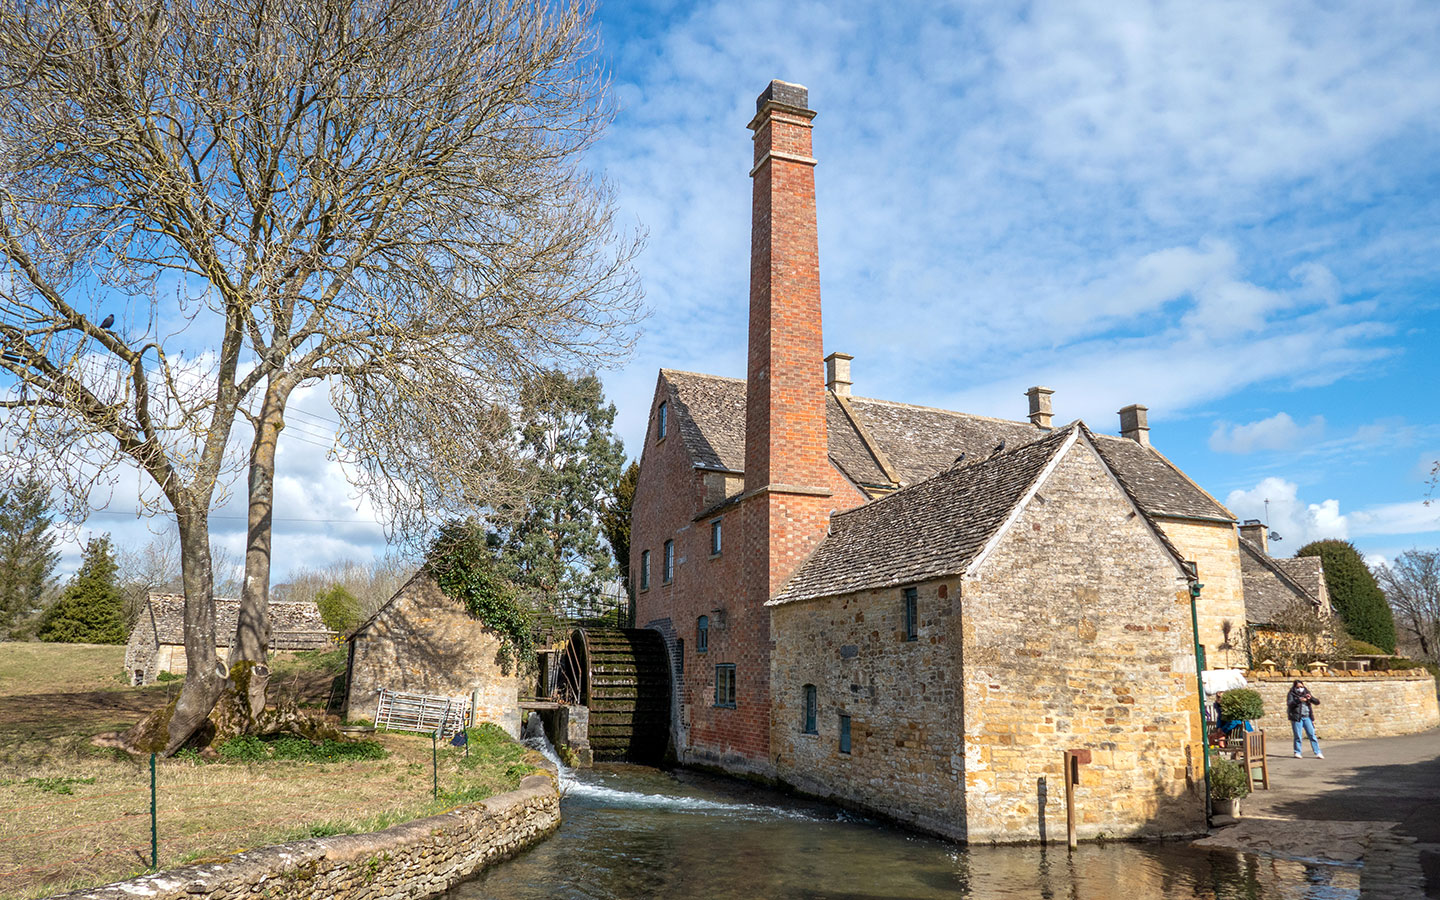  The Old Mill in Lower Slaughter